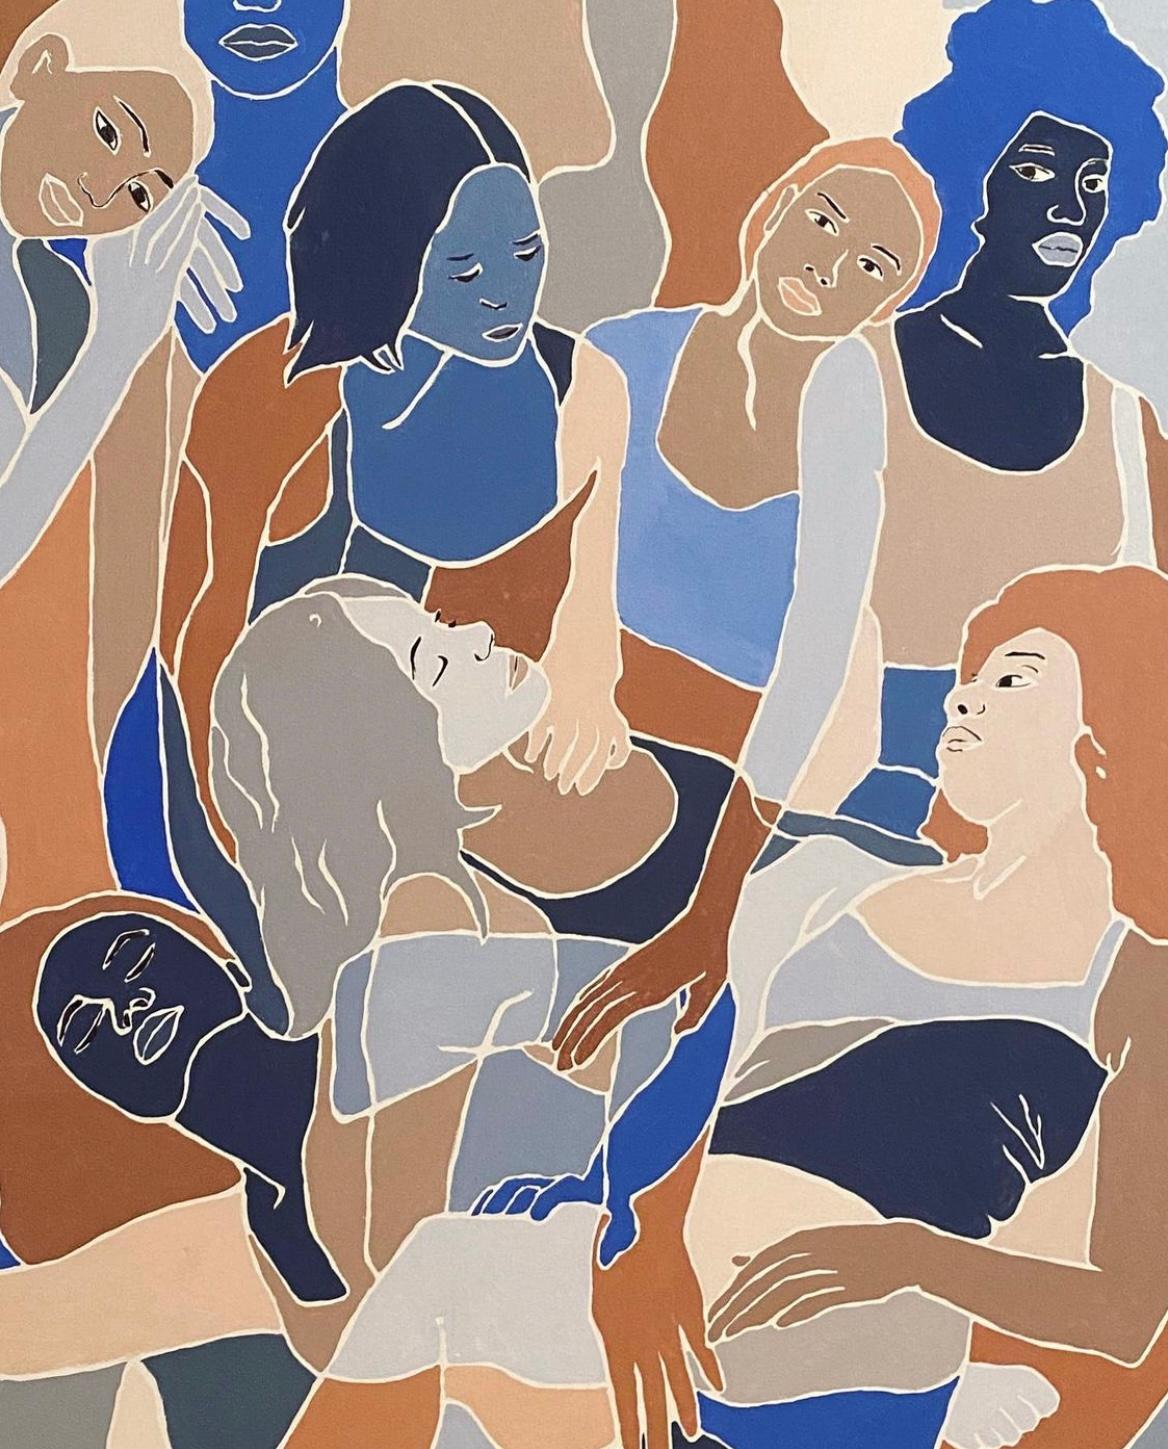 Artist Faustine Badrichani is inspired by explorations of female identity. Her paintings, created primarily with acrylic on paper and panel, highlight themes of intimacy and universality through figurative abstractions emphasizing a muted color